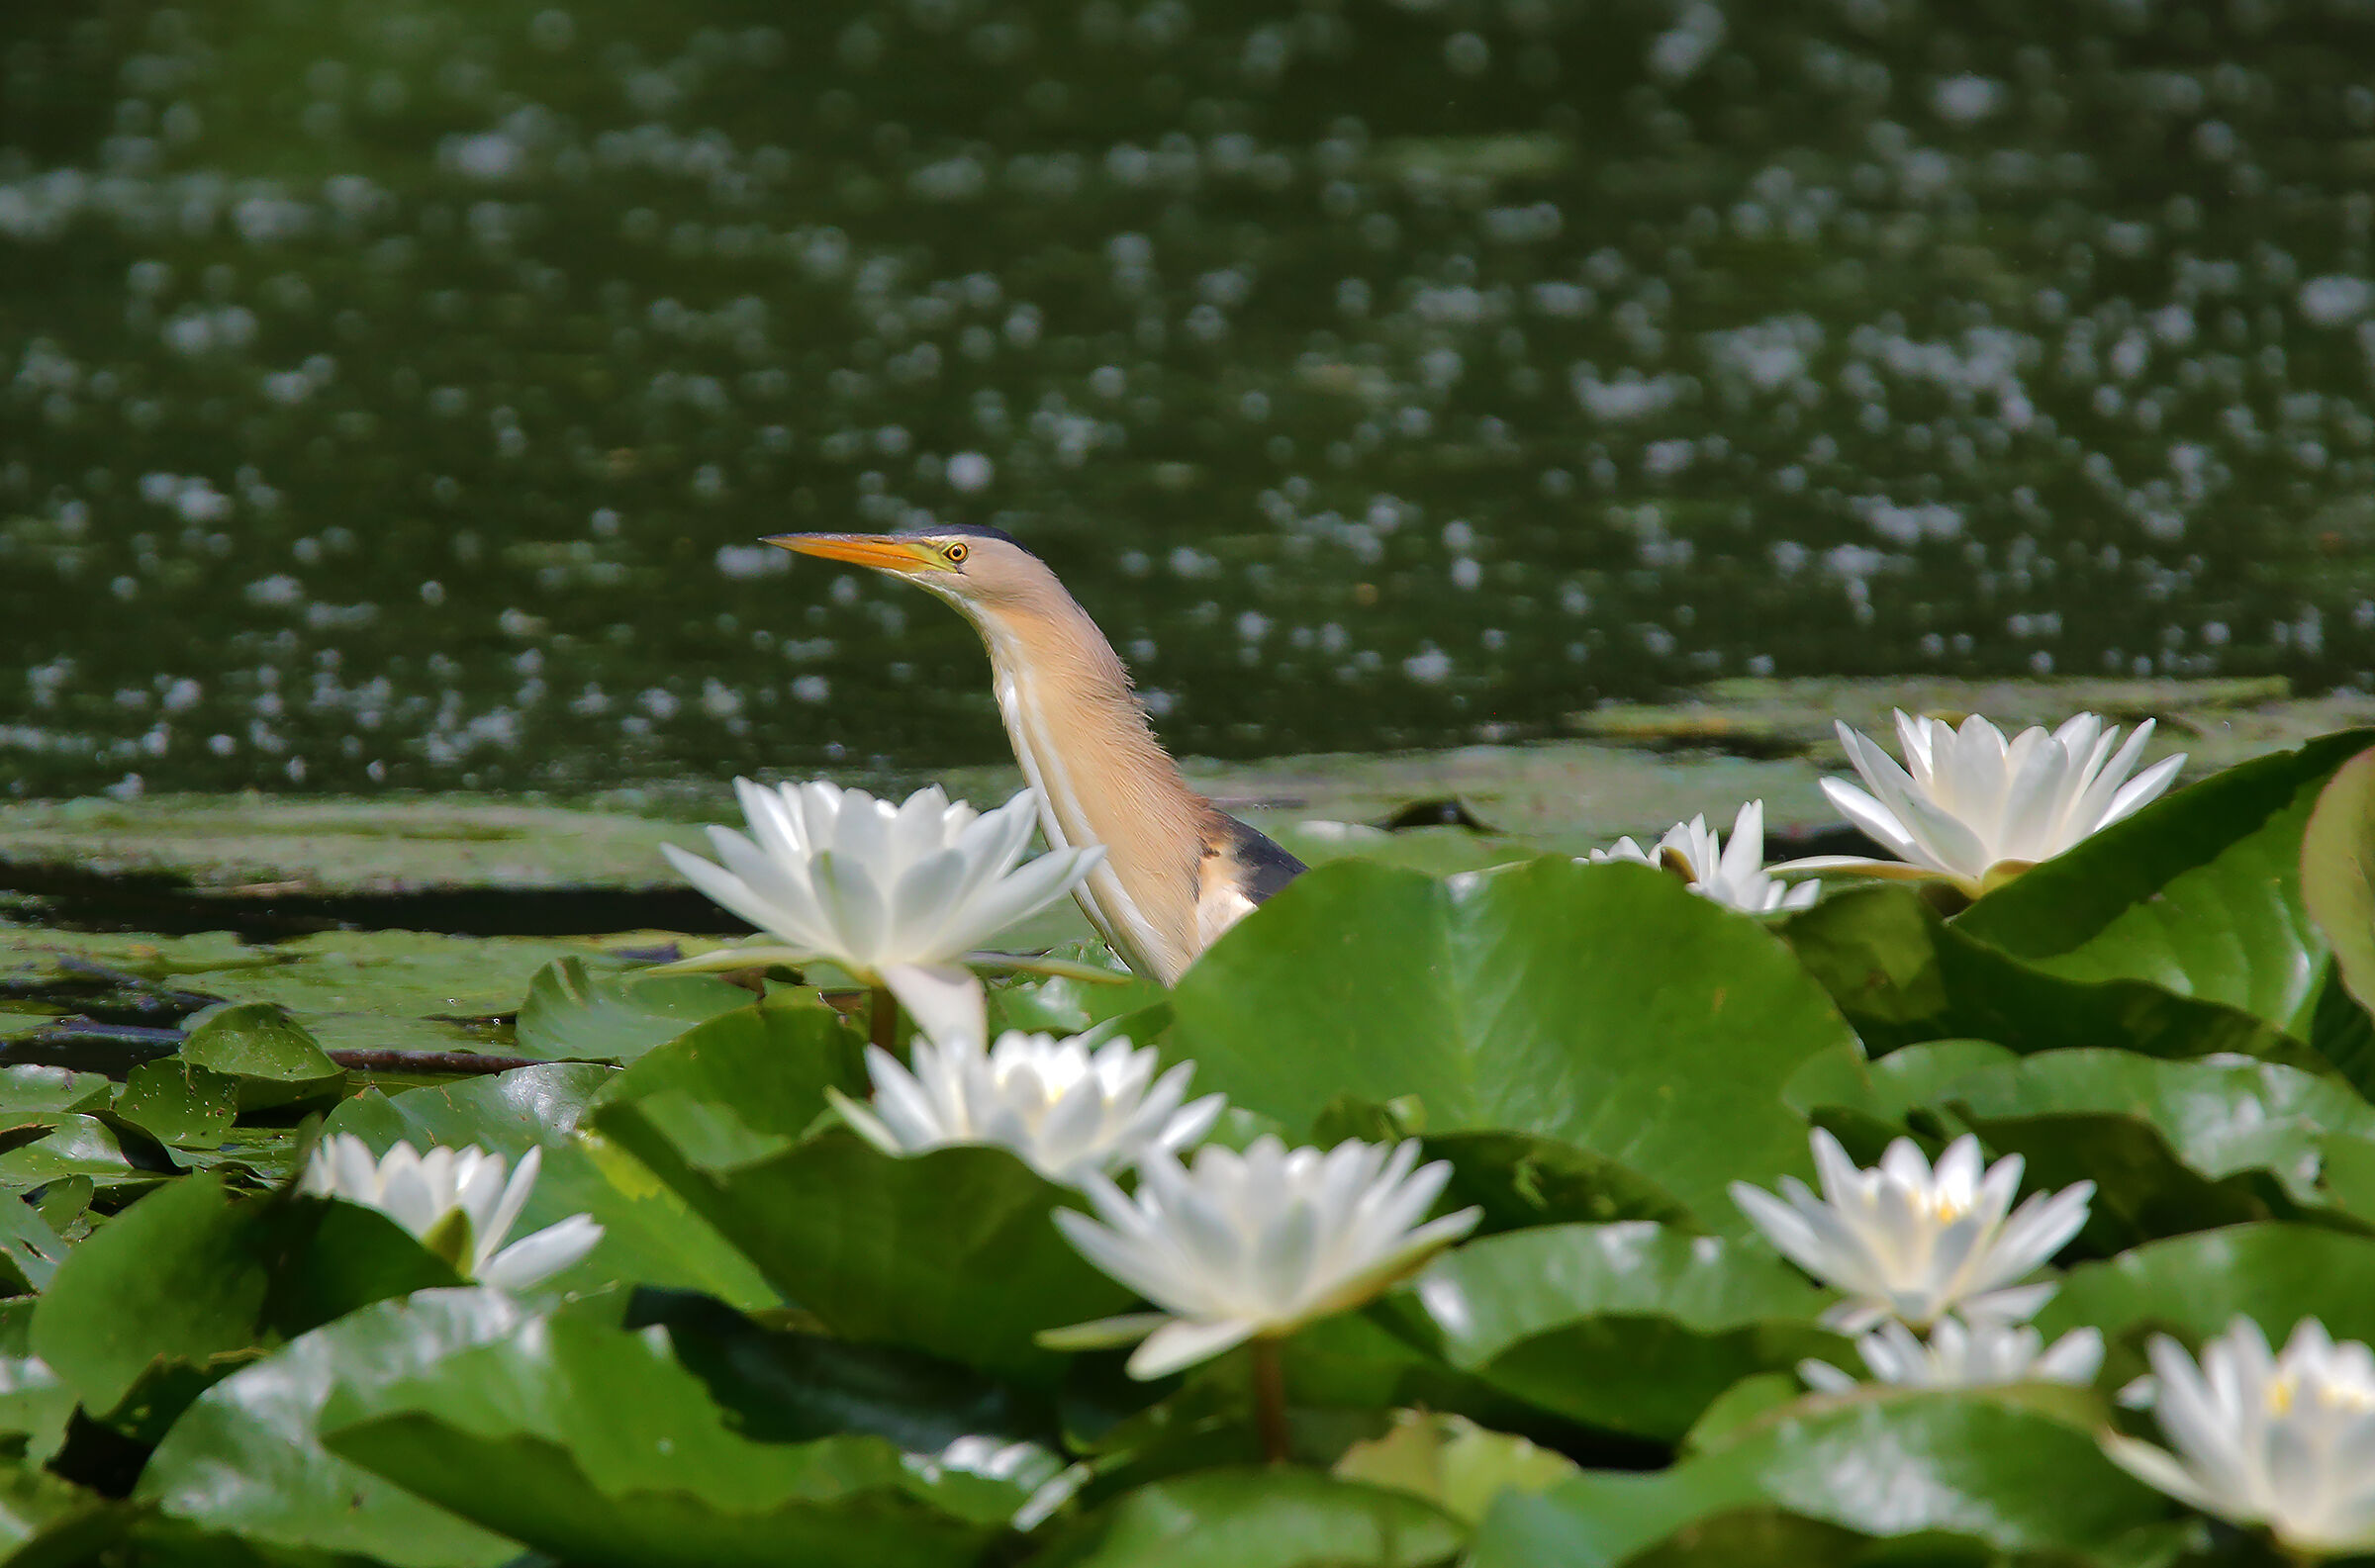 among the water lilies...